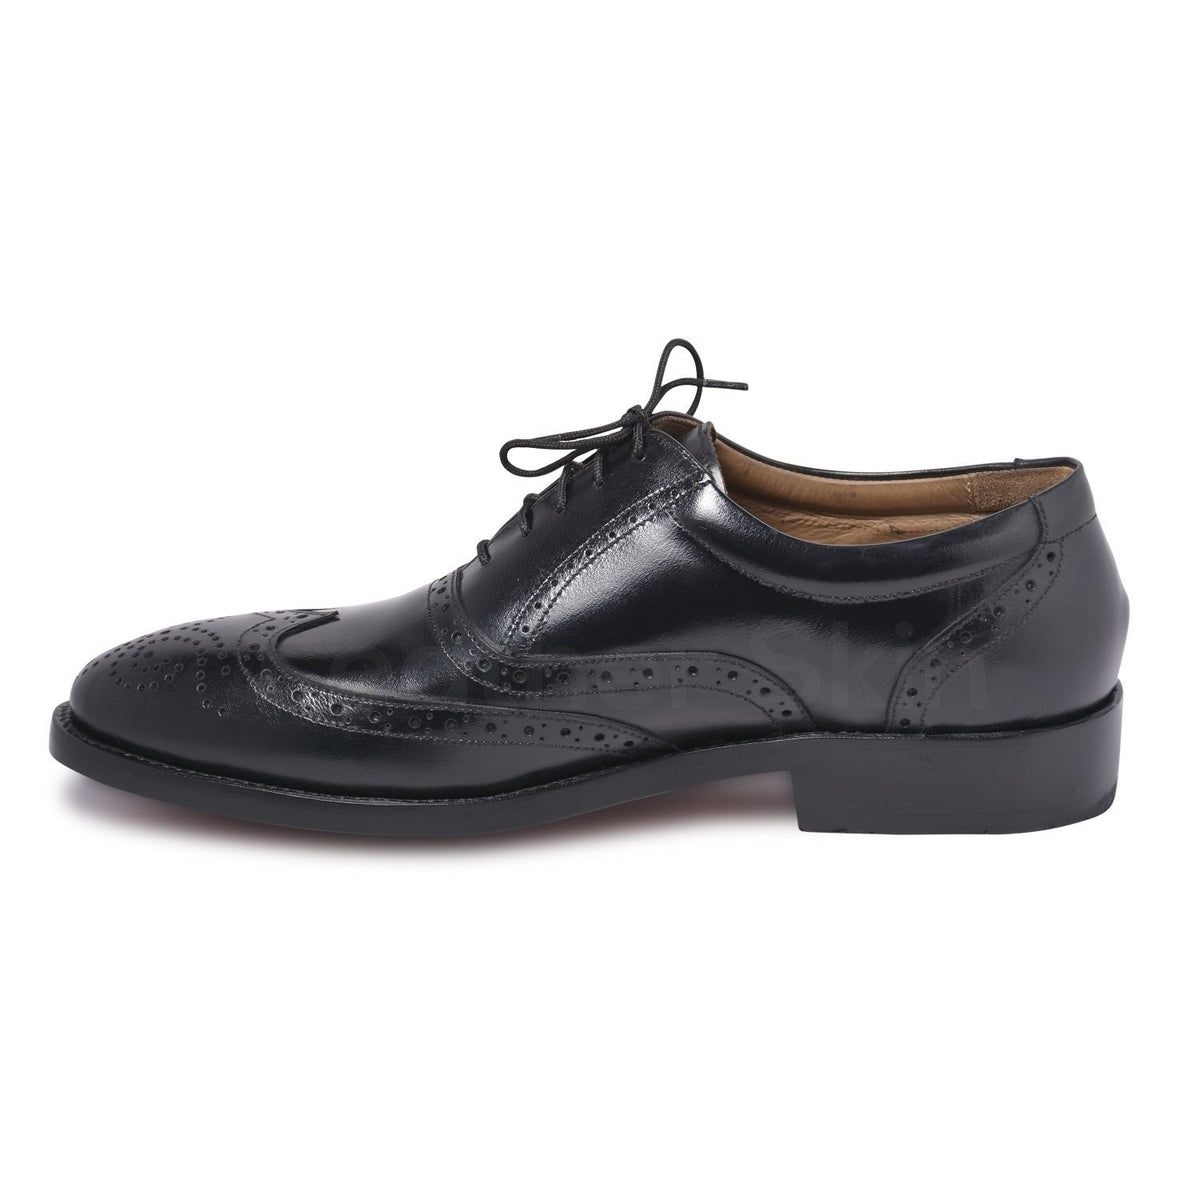 shiny oxford leather shoes mens